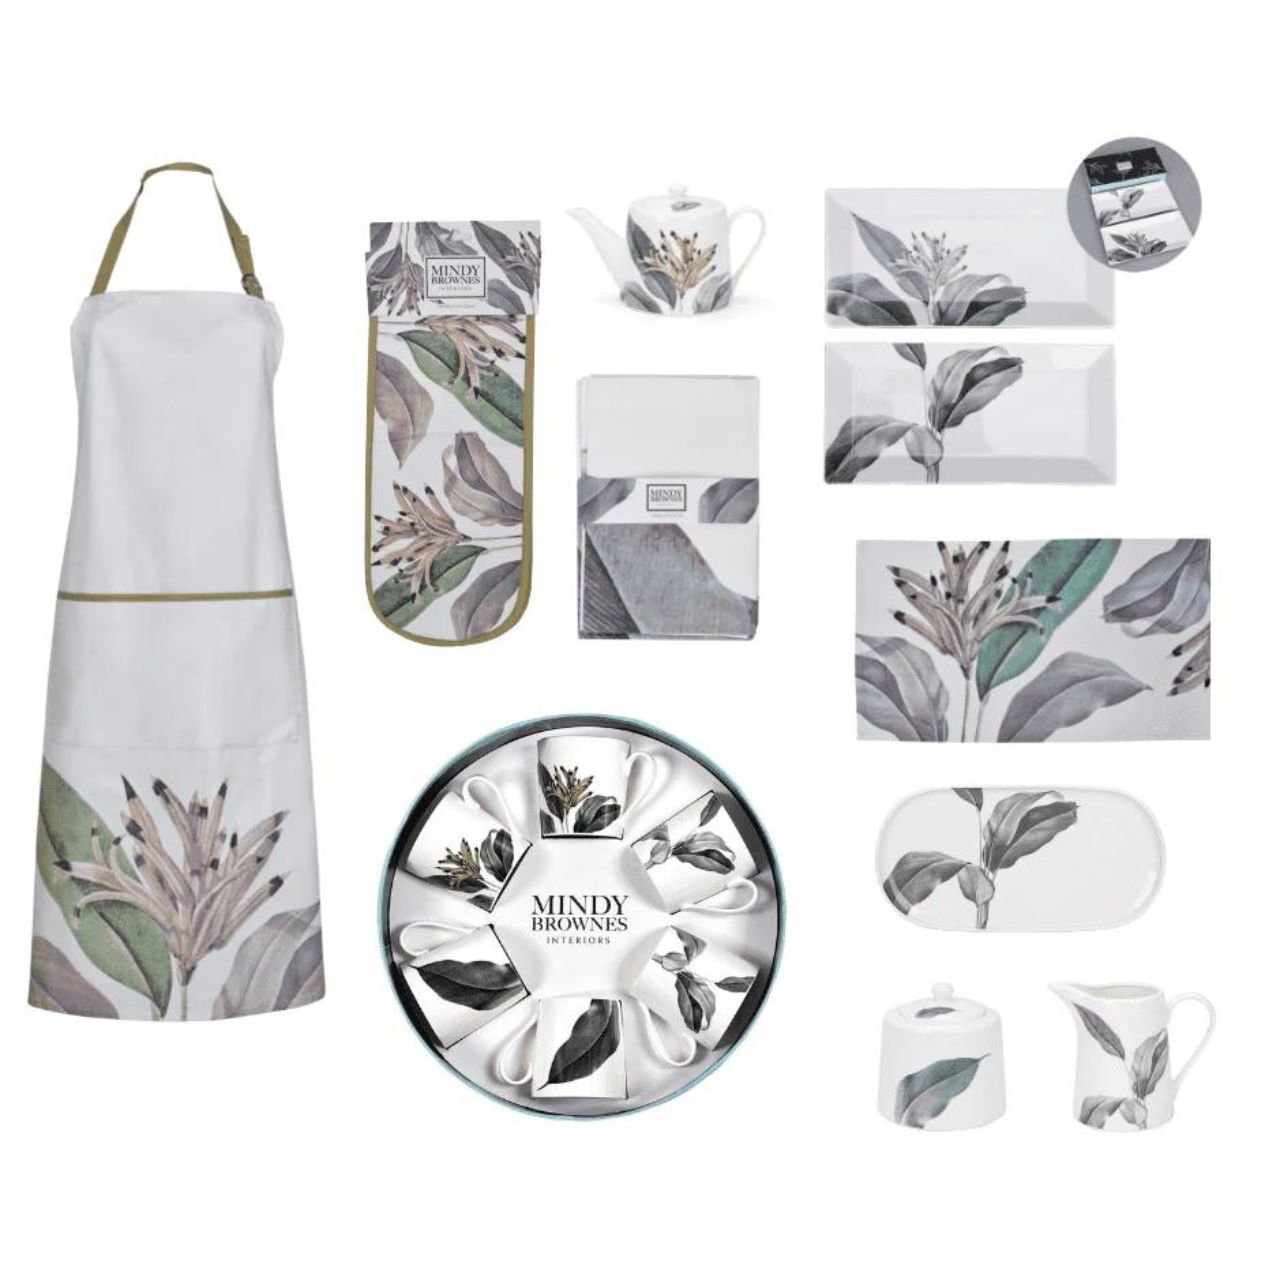 Birds of Paradise Apron by Mindy Brownes Interiors  A beautiful apron inspired with classic shades of green, gold & grey.  - Ideal house warming gift, new home, birthday or general occasion. - Part of the Birds Of Paradise Collection.